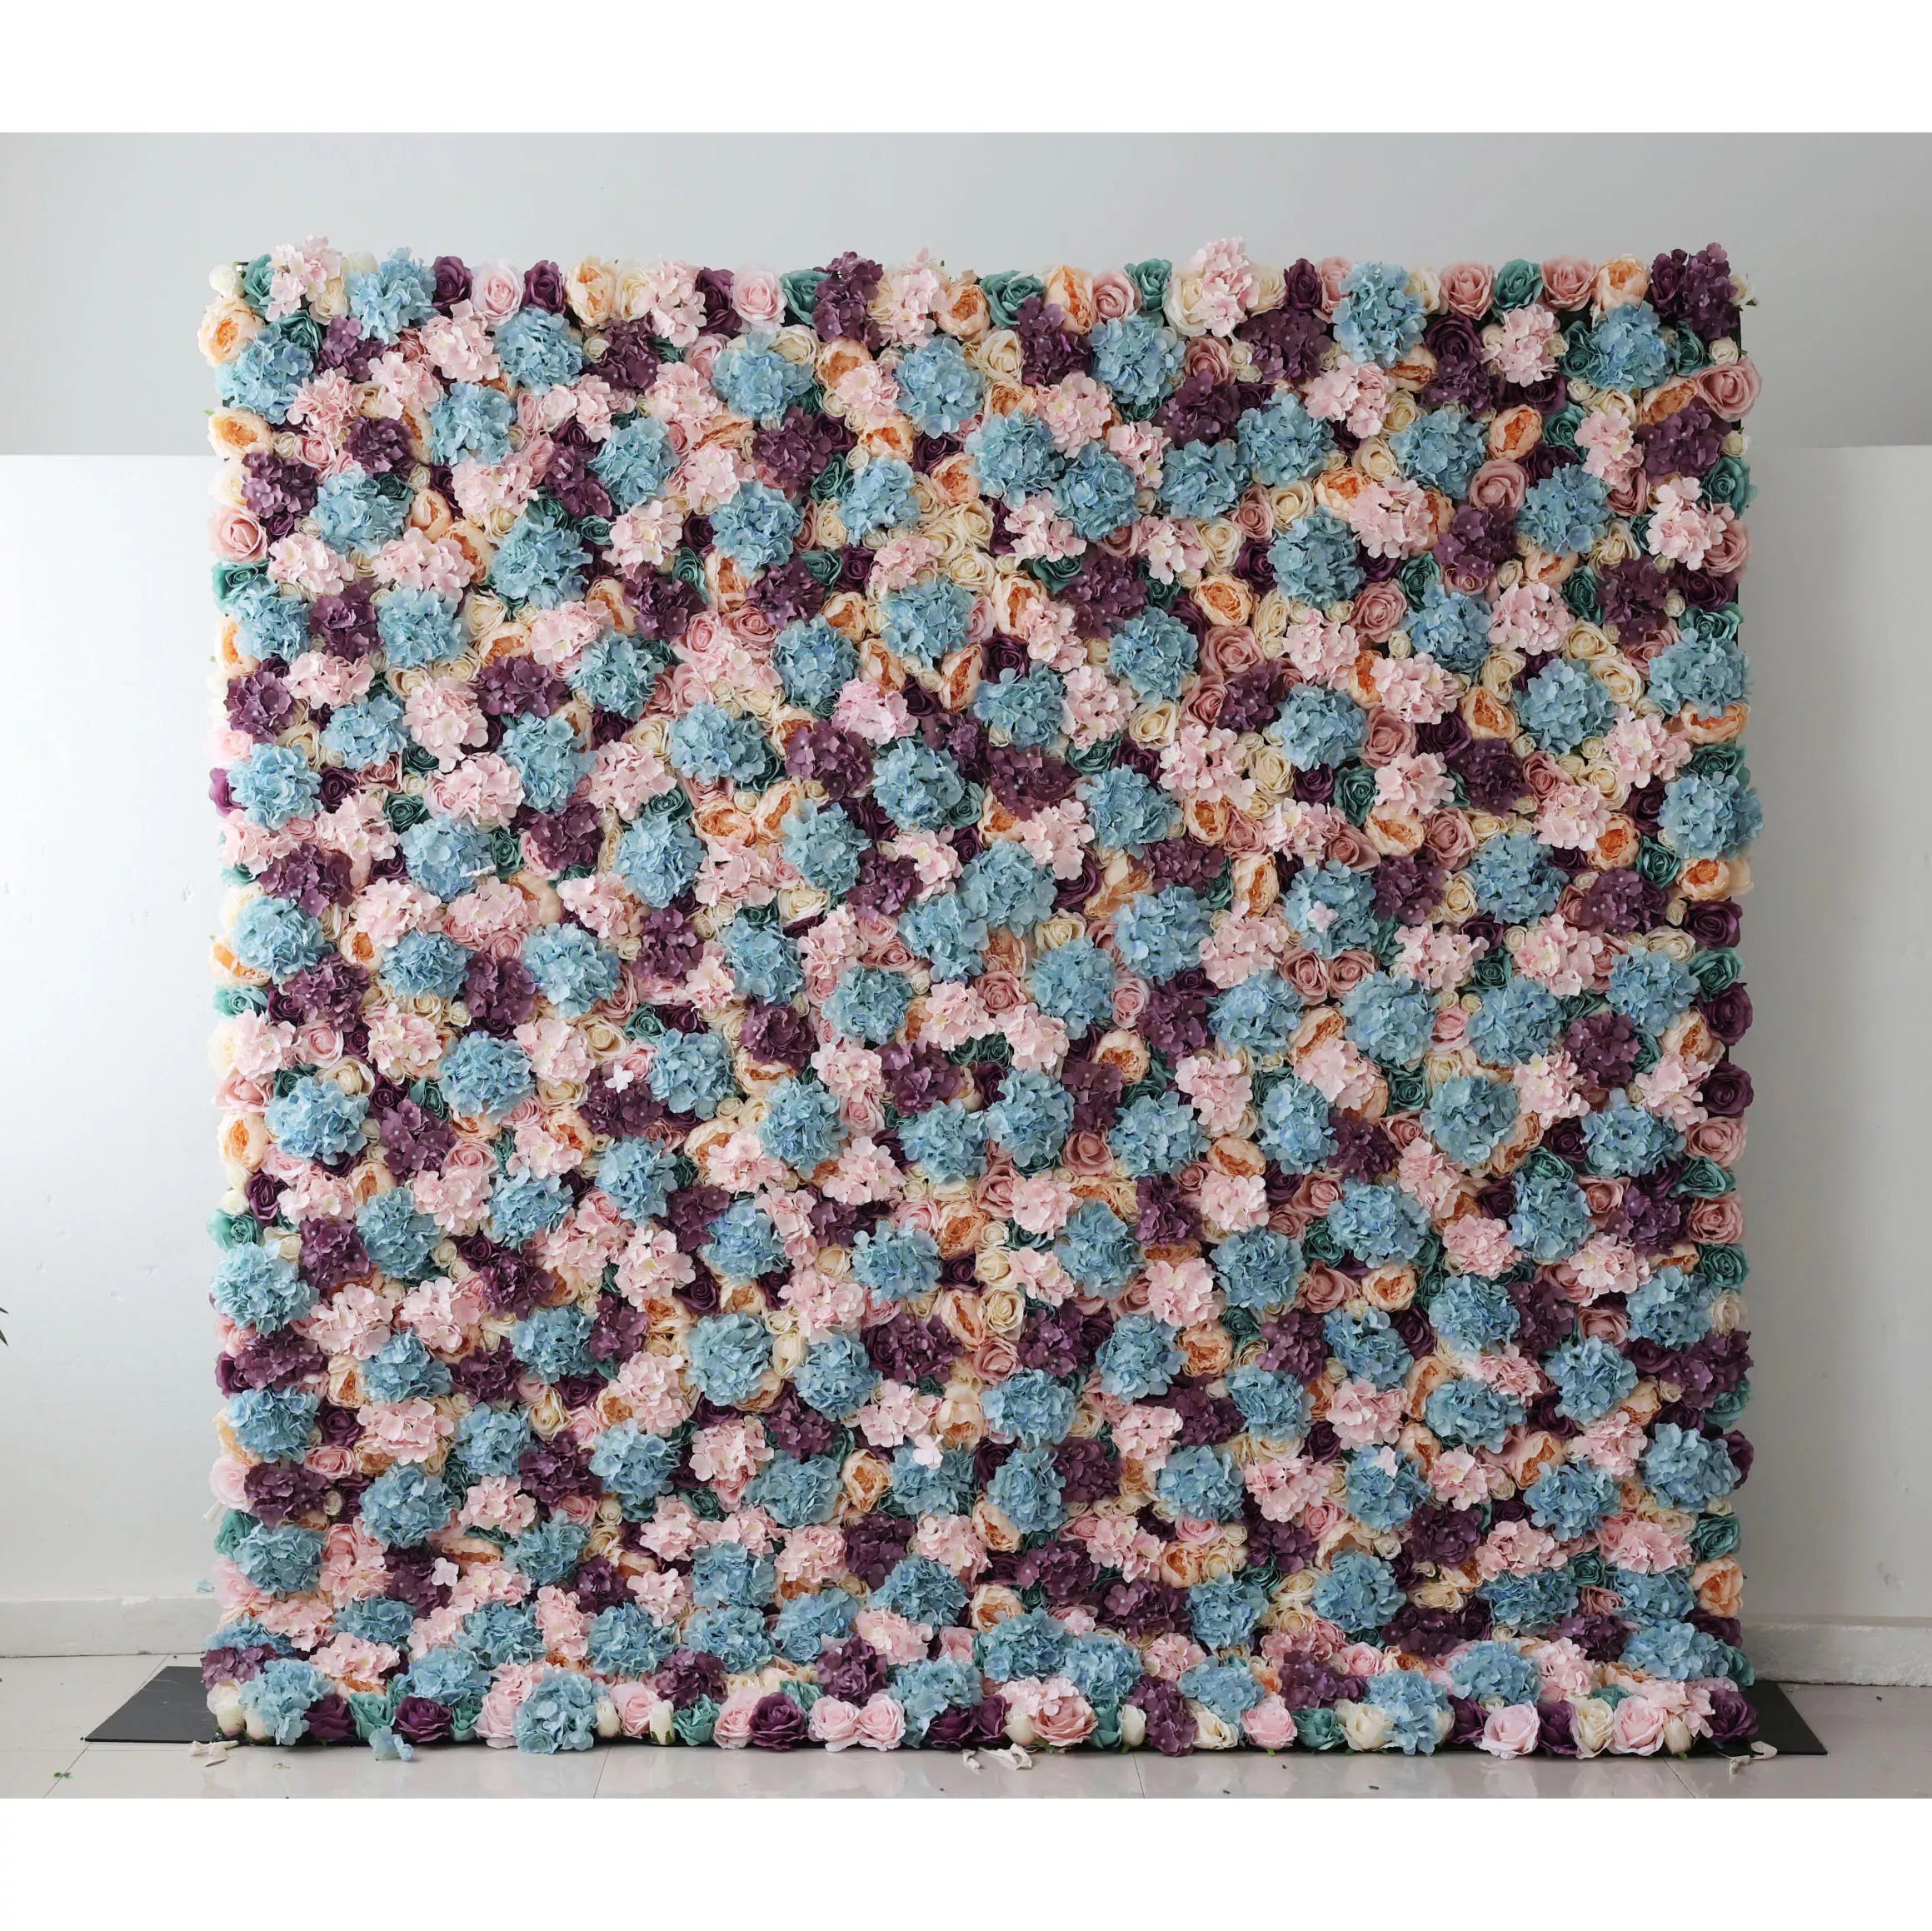 Valar Flowers Roll Up Artificial Flower Wall Backdrop: Pastel Patchwork - A Mélange of Muted Hues for Enchanted Evenings-VF-235